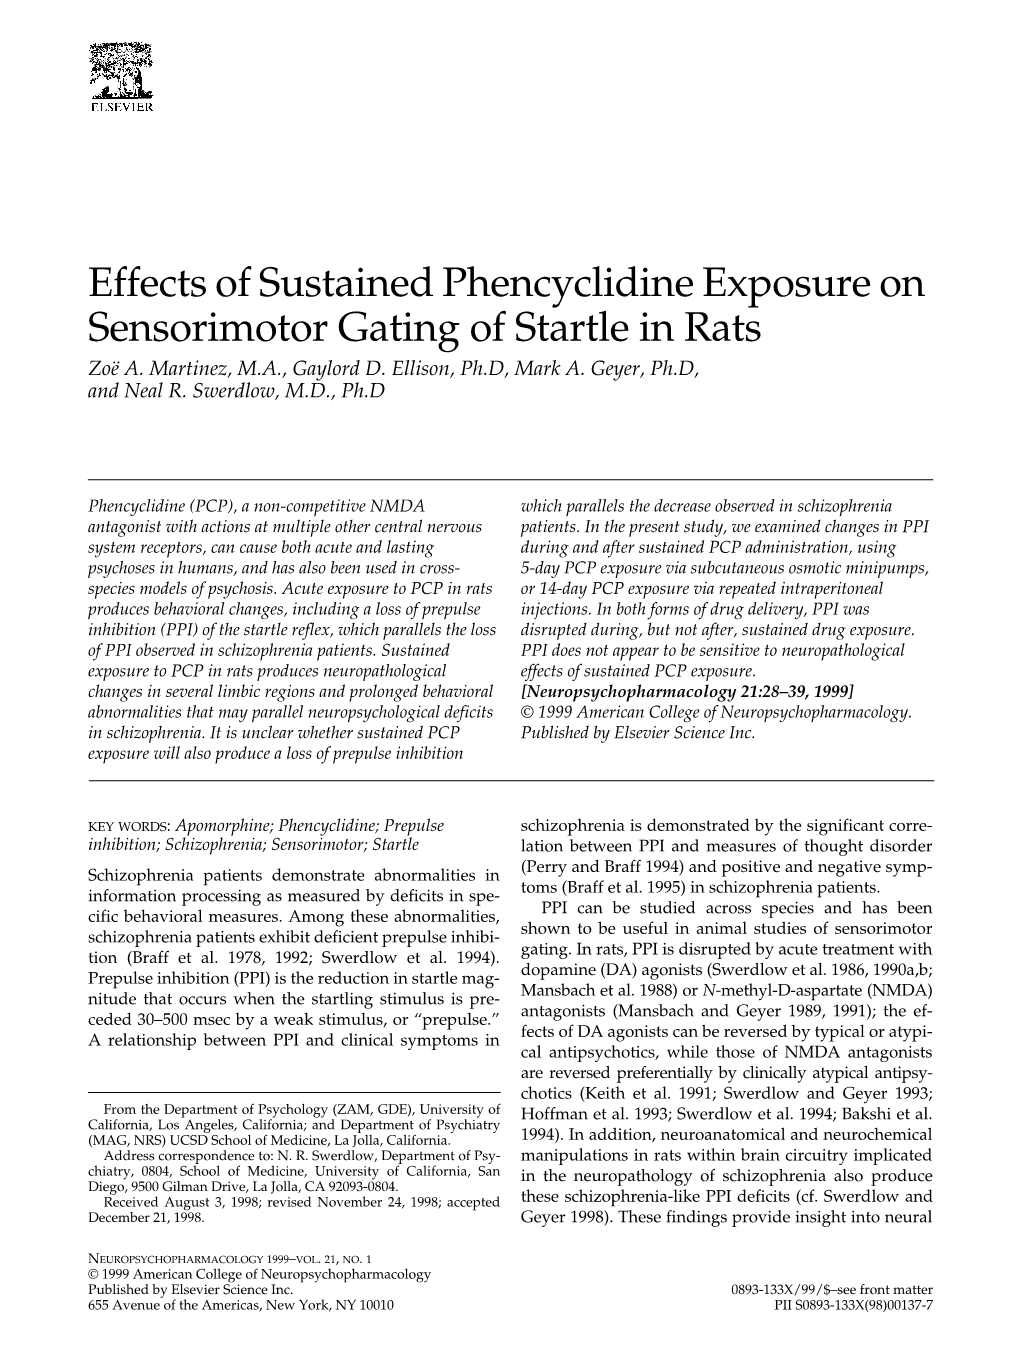 Effects of Sustained Phencyclidine Exposure on Sensorimotor Gating of Startle in Rats Zoë A